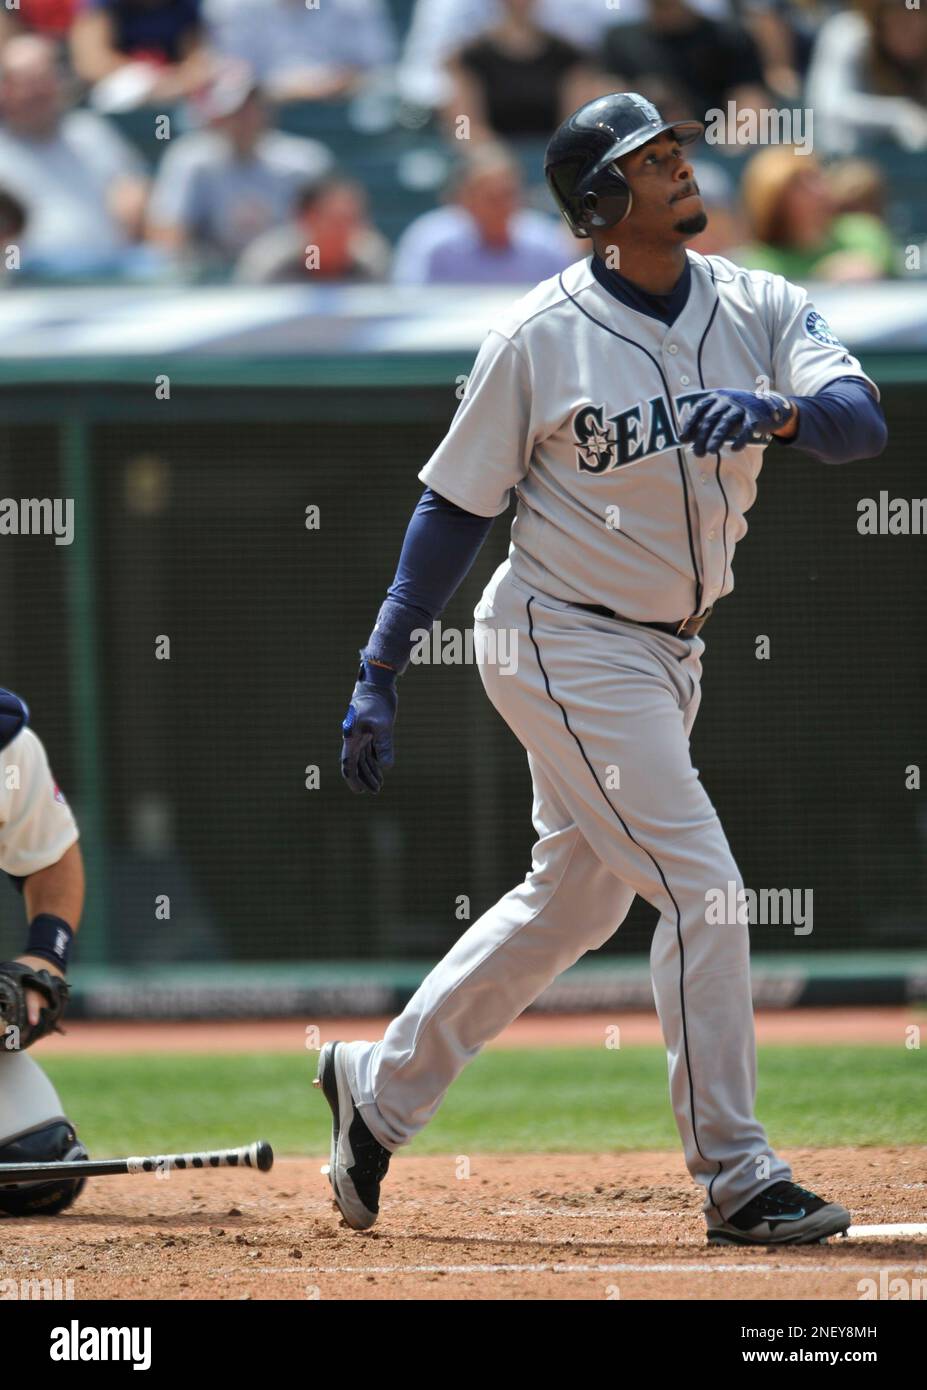 Seattle Mariners' Ken Griffey Jr. watches his 624th career home run during  a baseball game against the Cleveland Indians on Sunday, August 23, 2009,  at Progressive Field in Cleveland, Ohio. (AP Photo/David